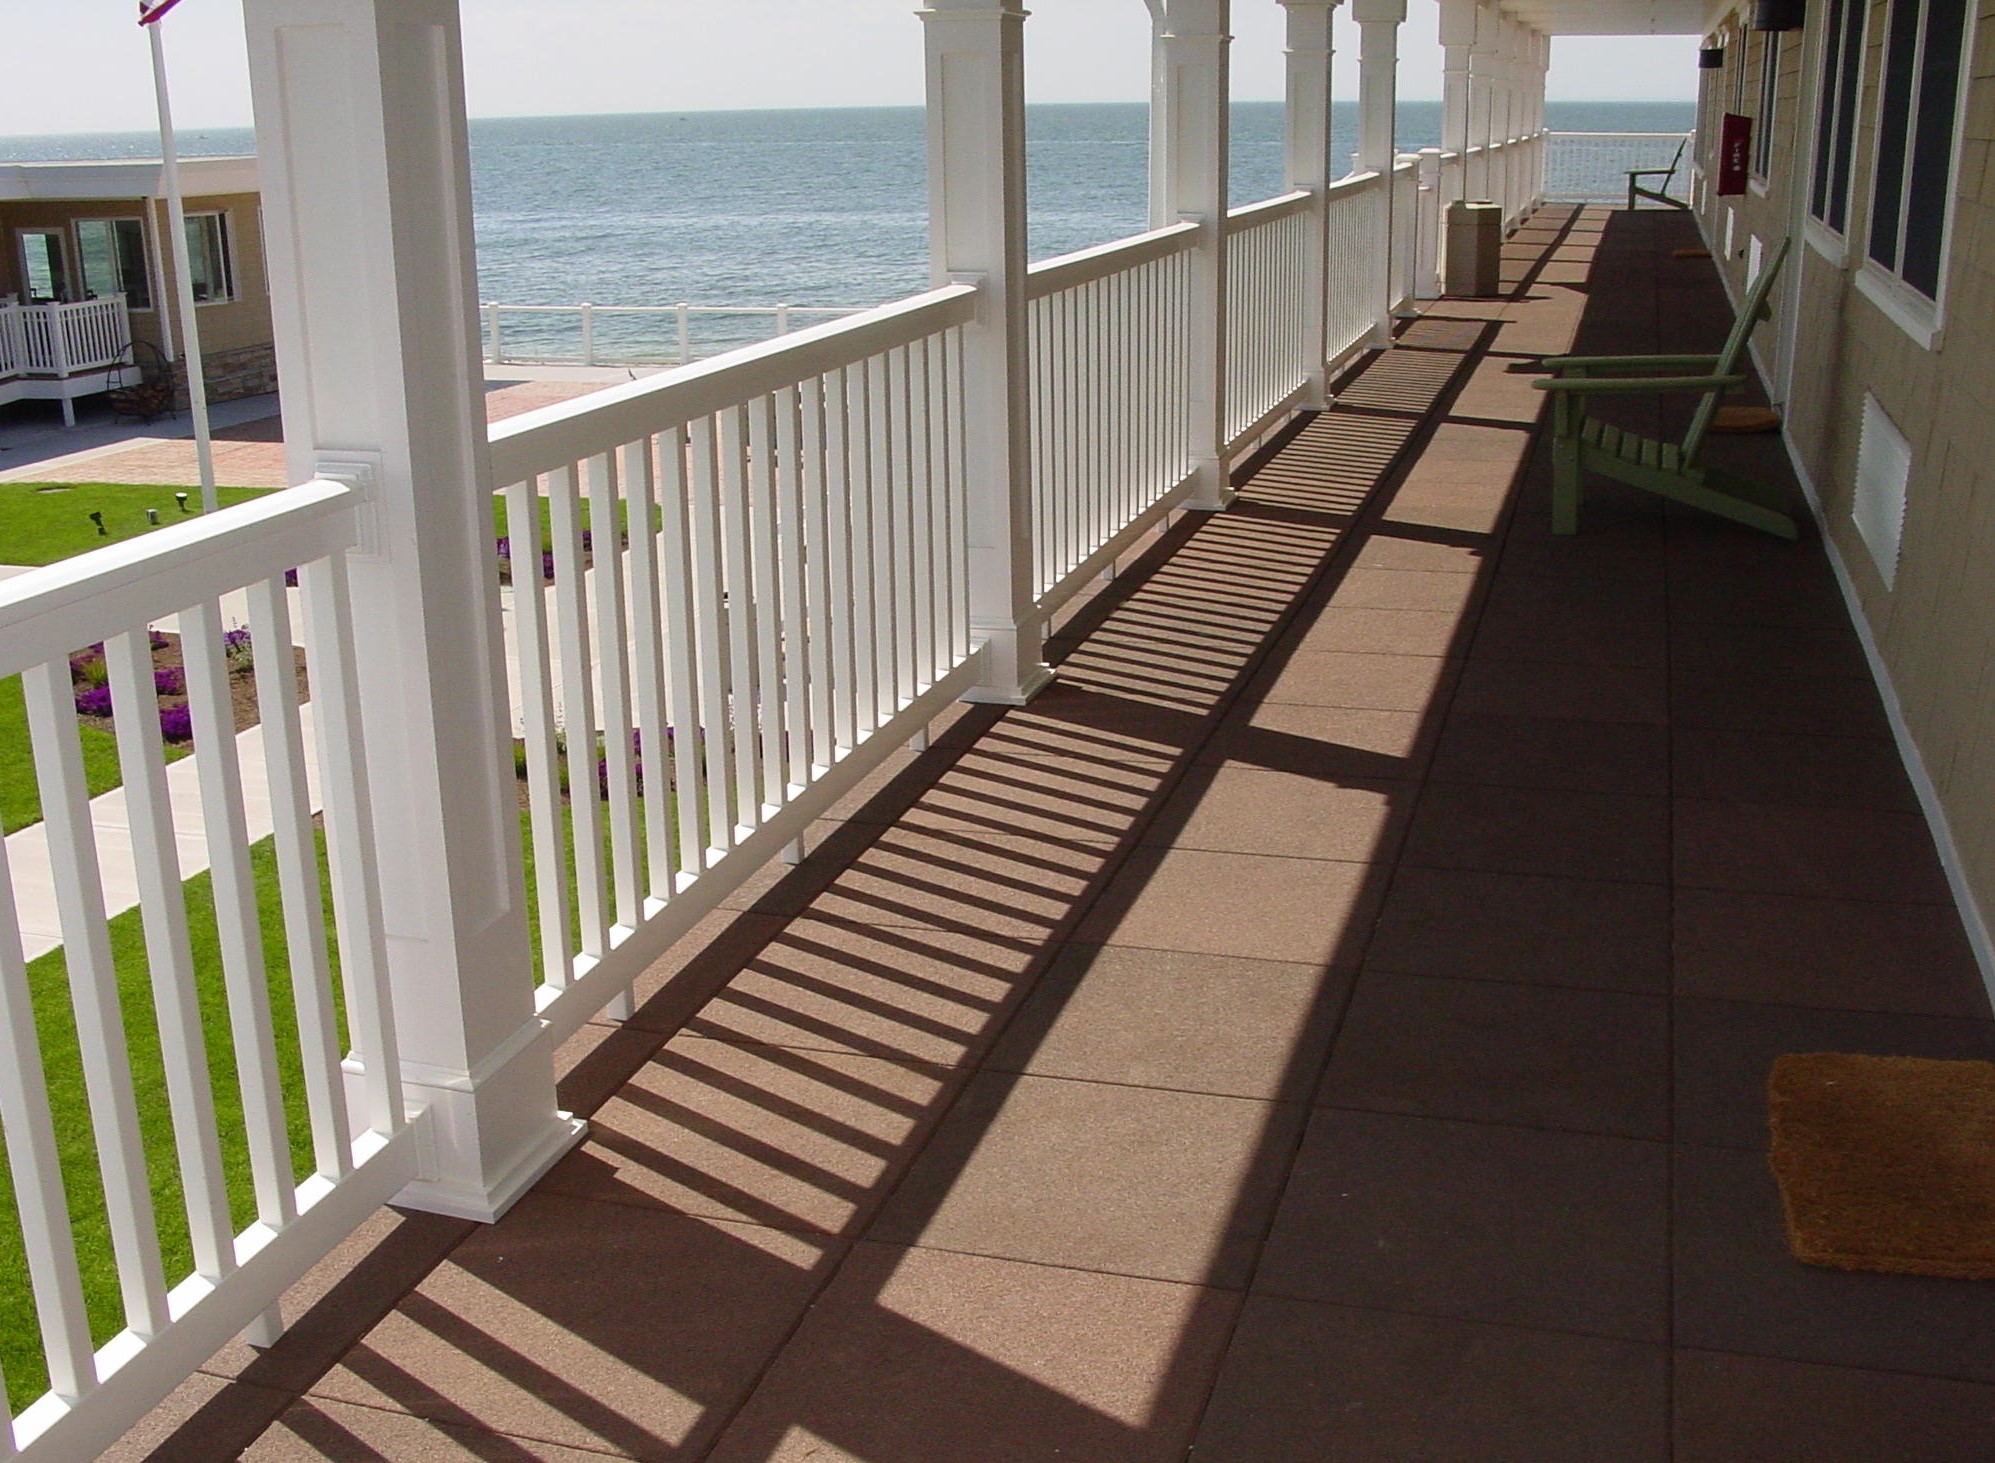 Walkway tiles system that leads to the water using 1 3/4" thick Pave-land Series